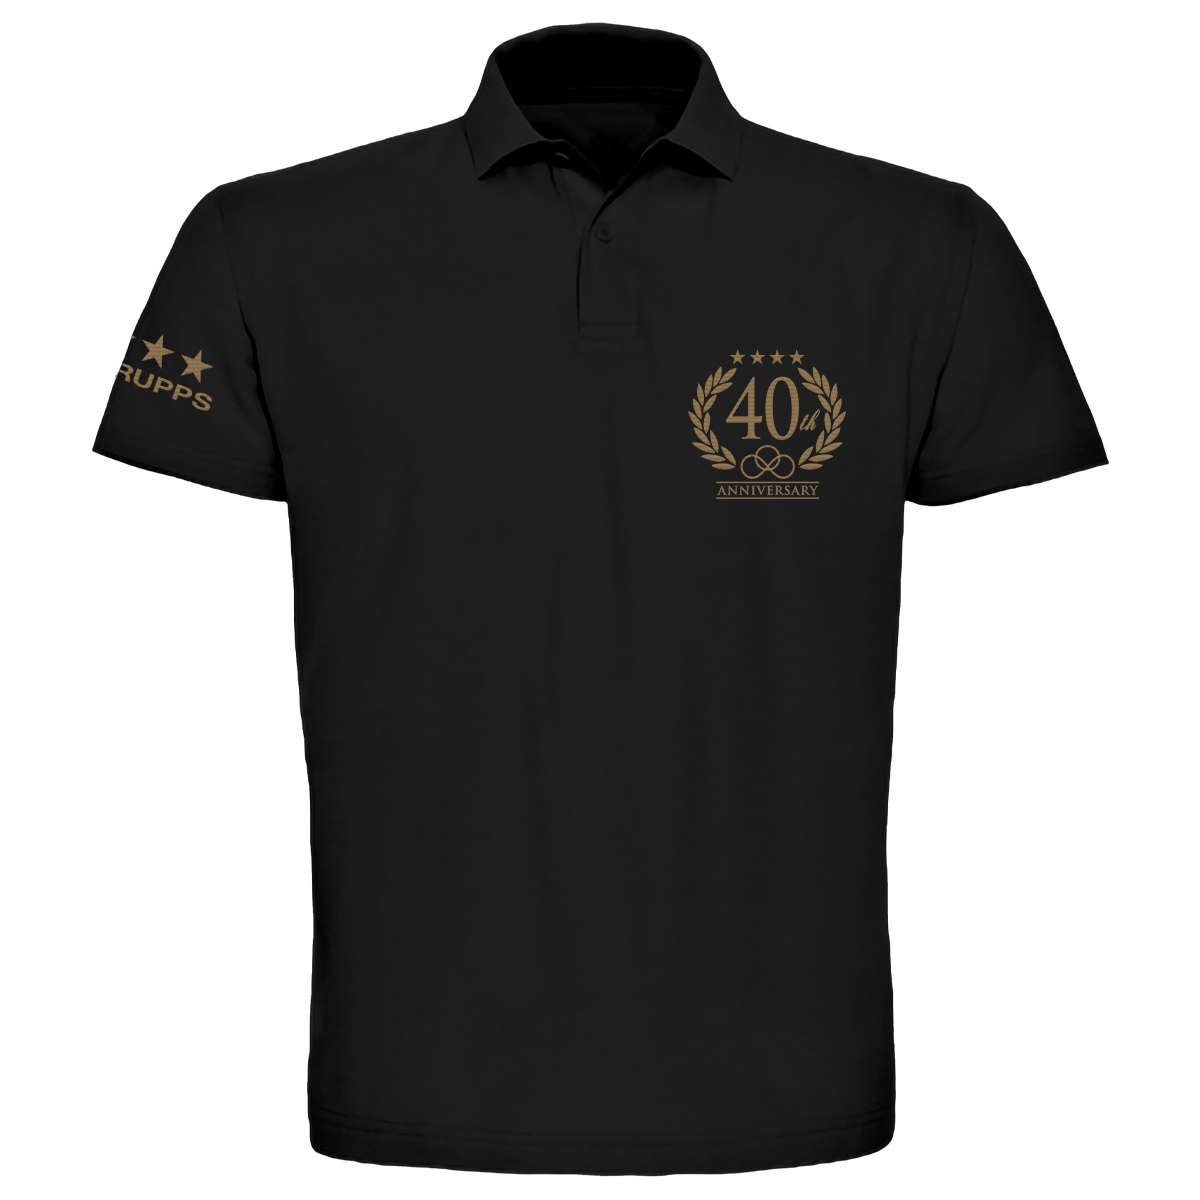 Die Krupps - 40 Years Gold Edition - Polo Shirt - Embroidered